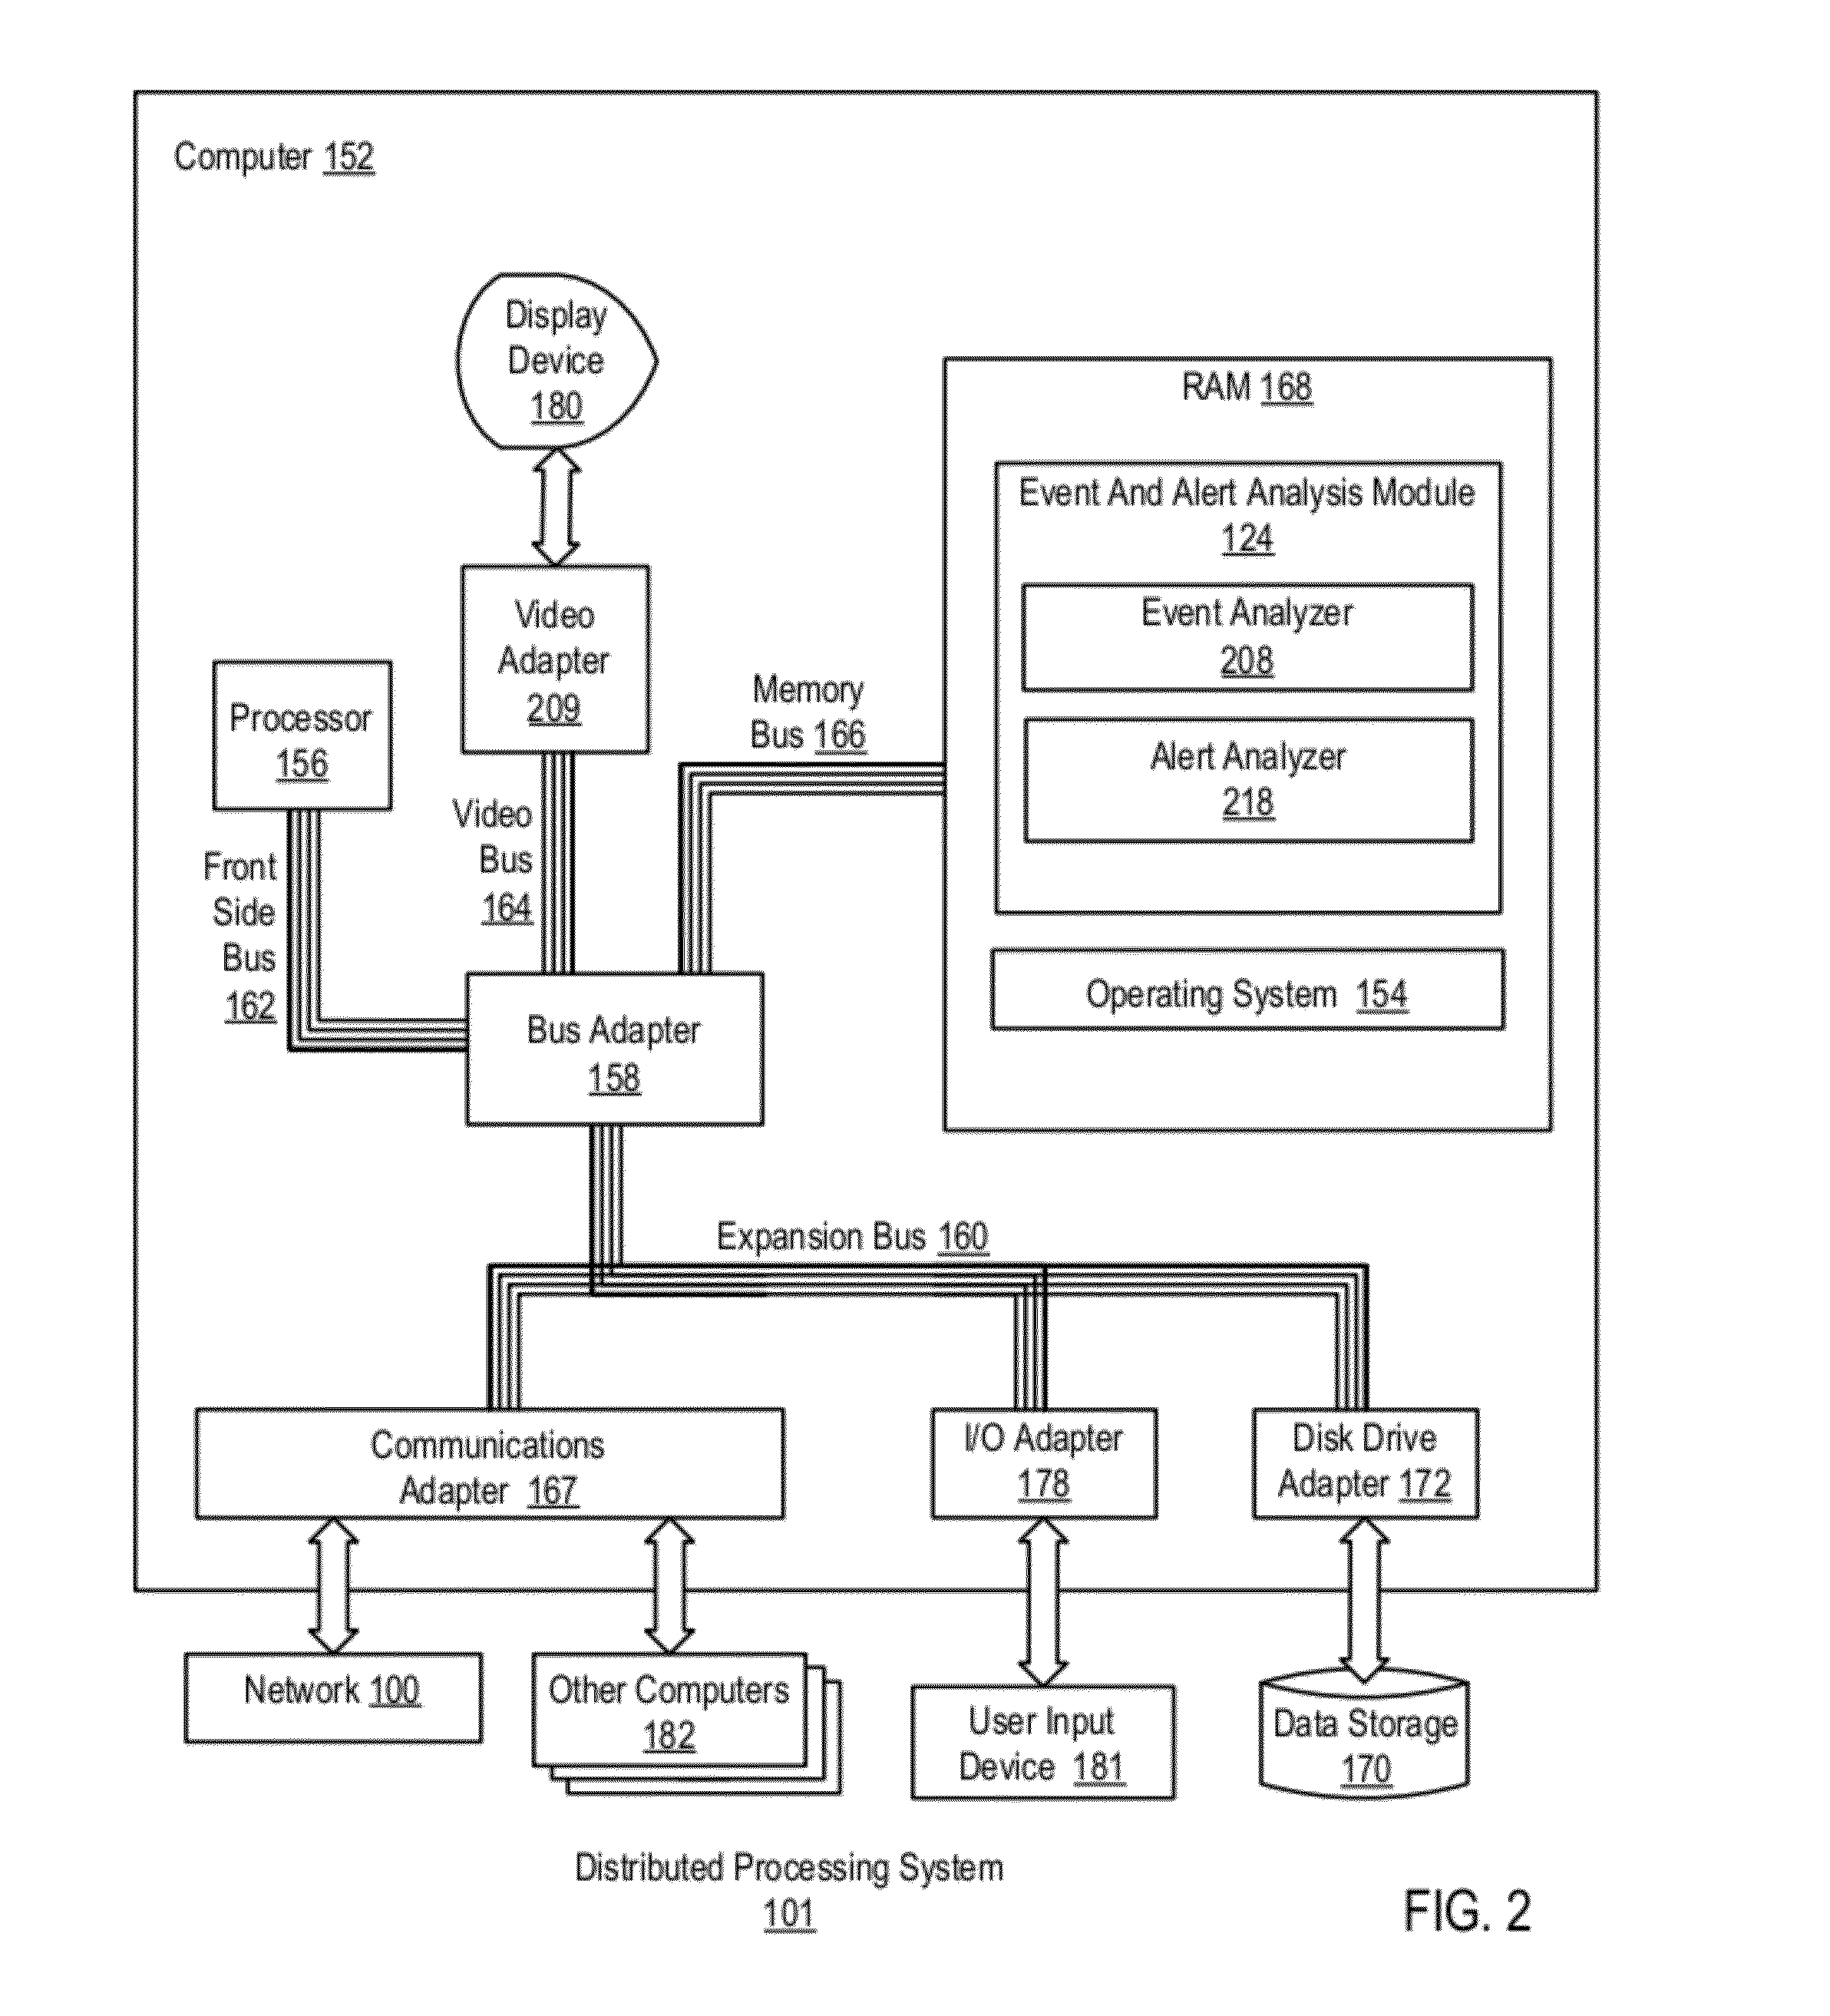 Restarting Event And Alert Analysis After A Shutdown In A Distributed Processing System